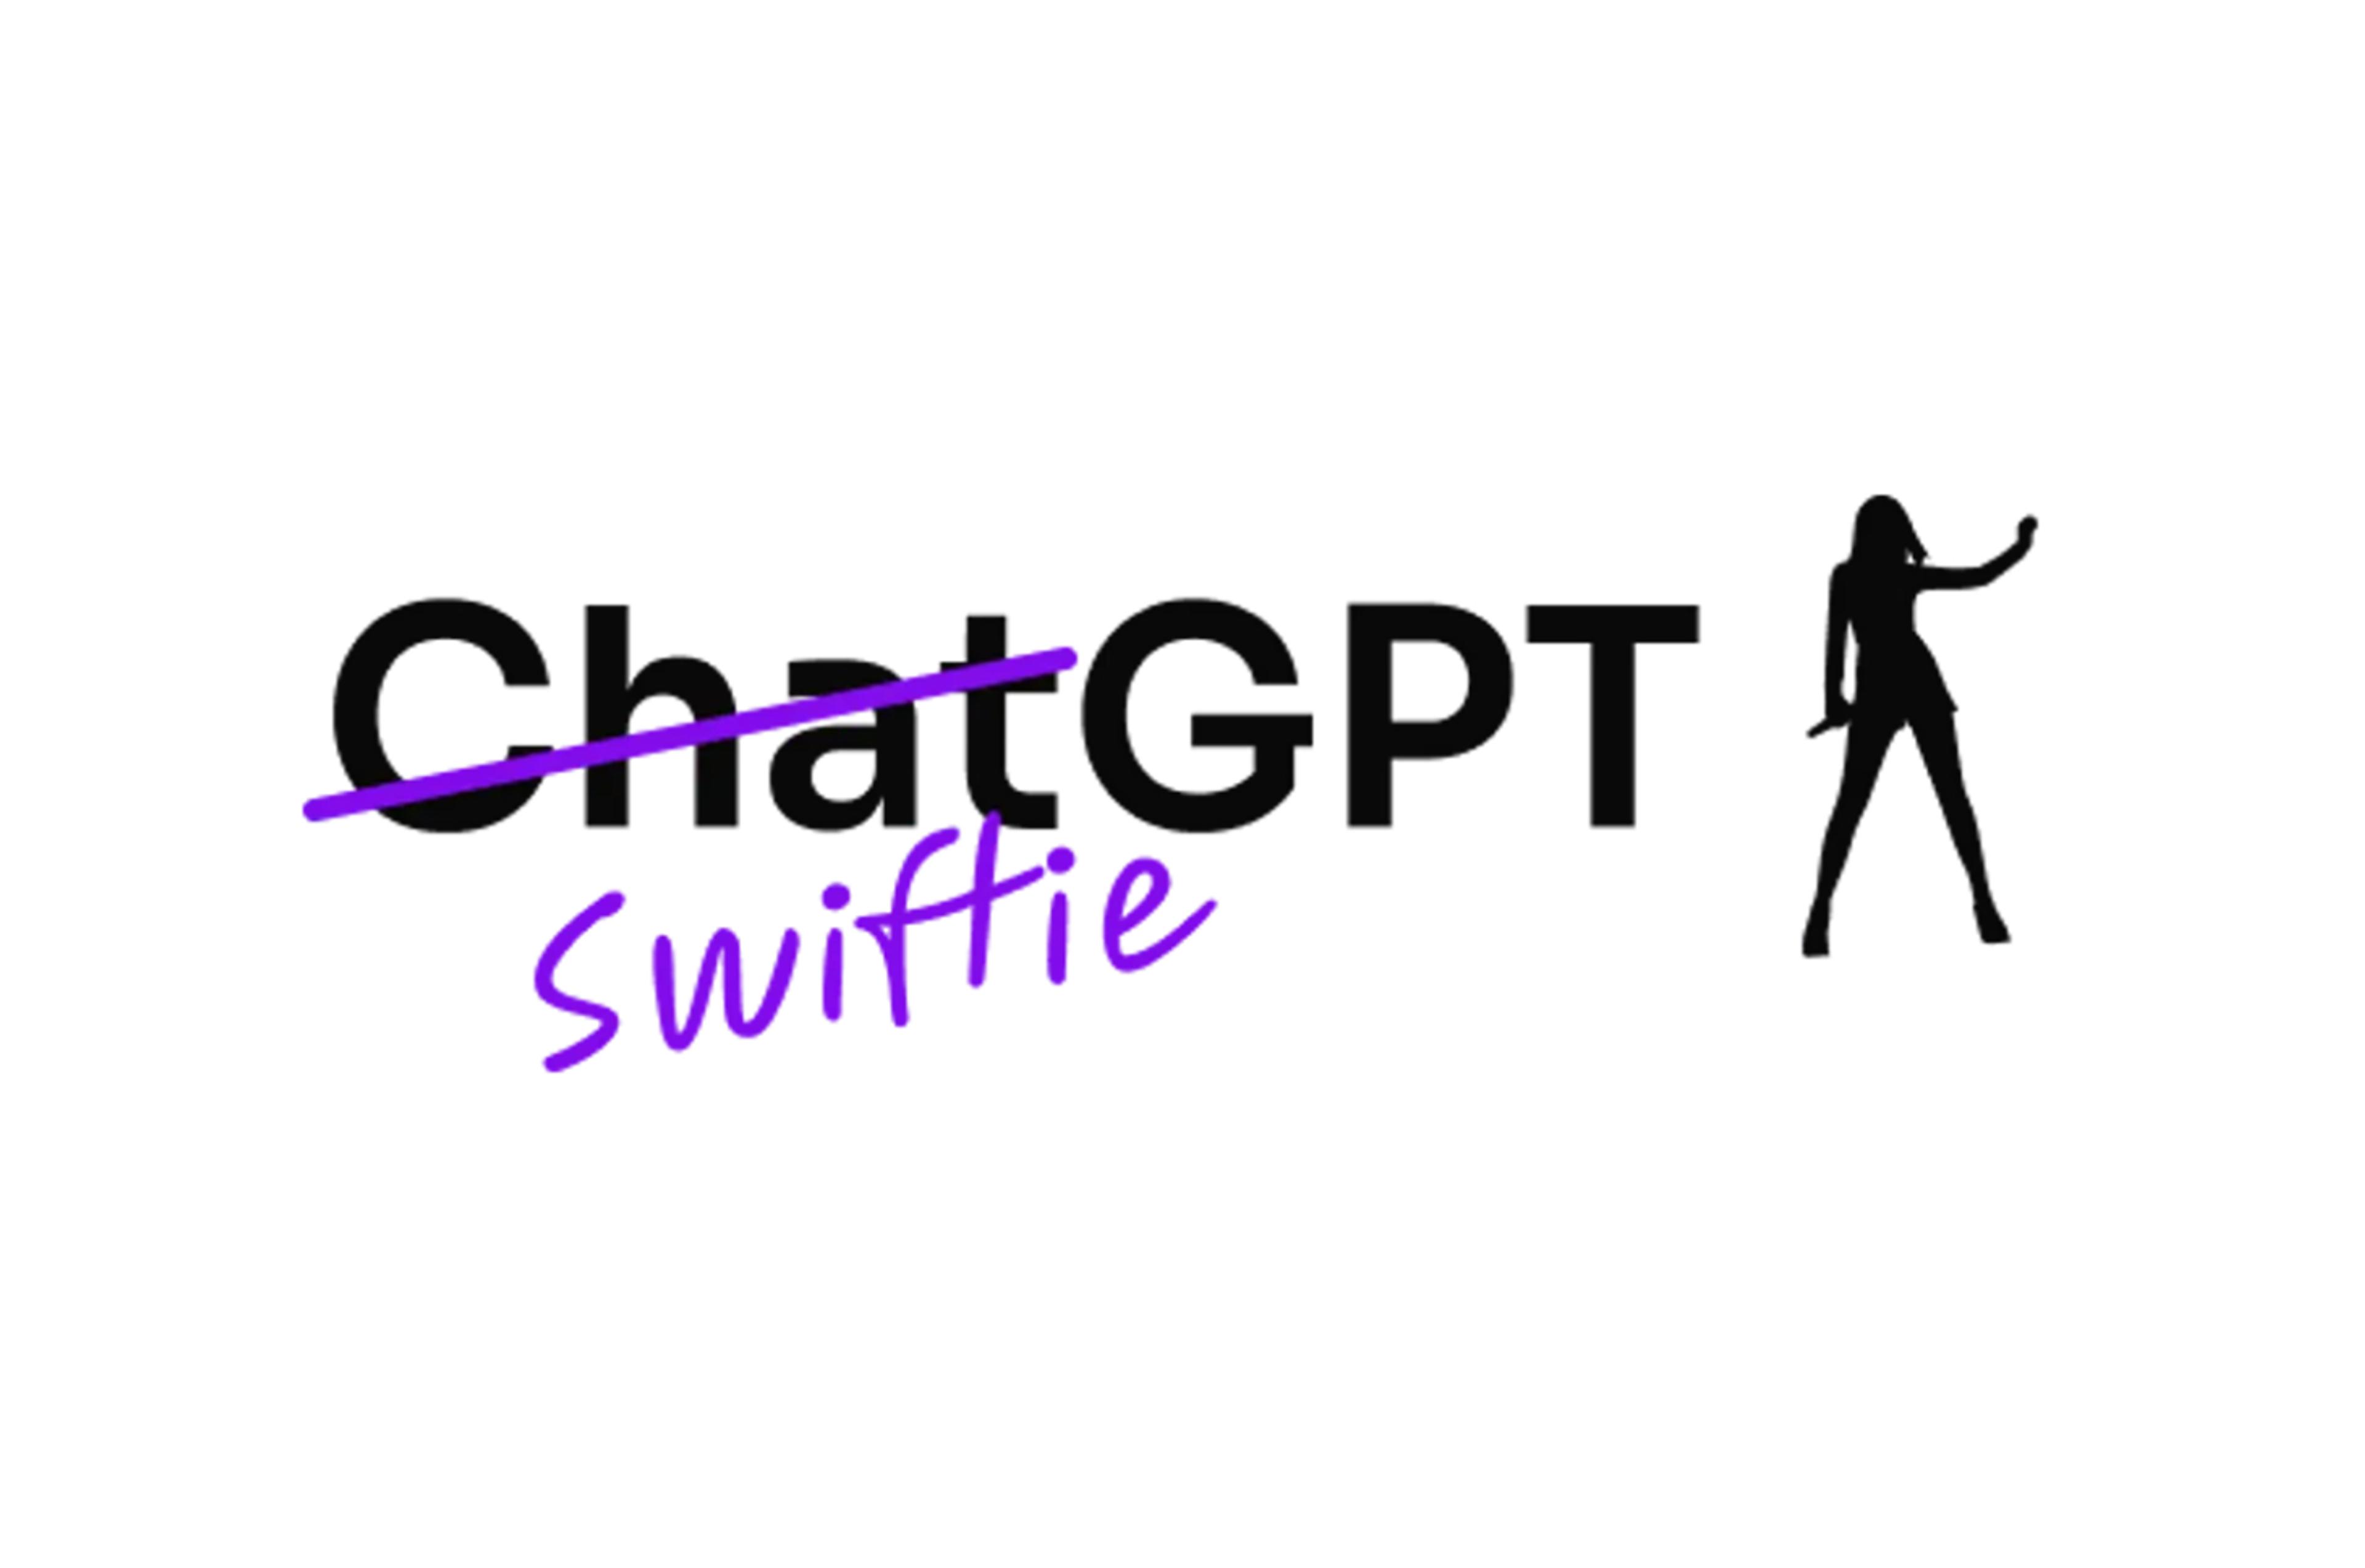 Can I Ask You a Question? Building a Taylor Swift Chatbot with the Astra DB Vector Database